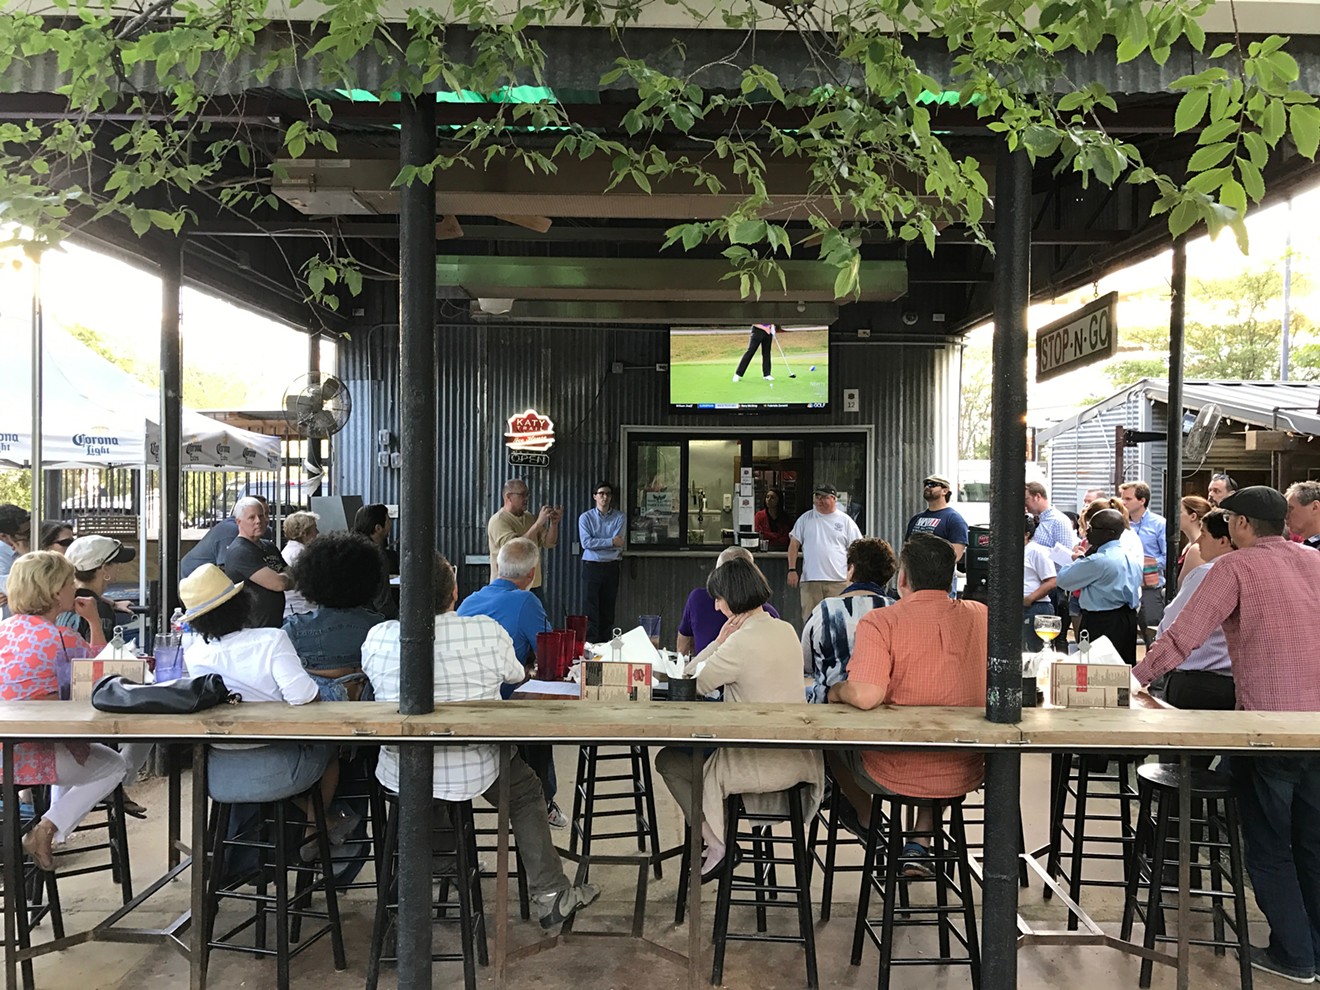 Dallas bar and restaurant owners, employees and customers gathered Monday night at Katy Trail Ice House to discuss a proposed late-night overlay that could force businesses in certain neighborhoods to shut down at midnight.